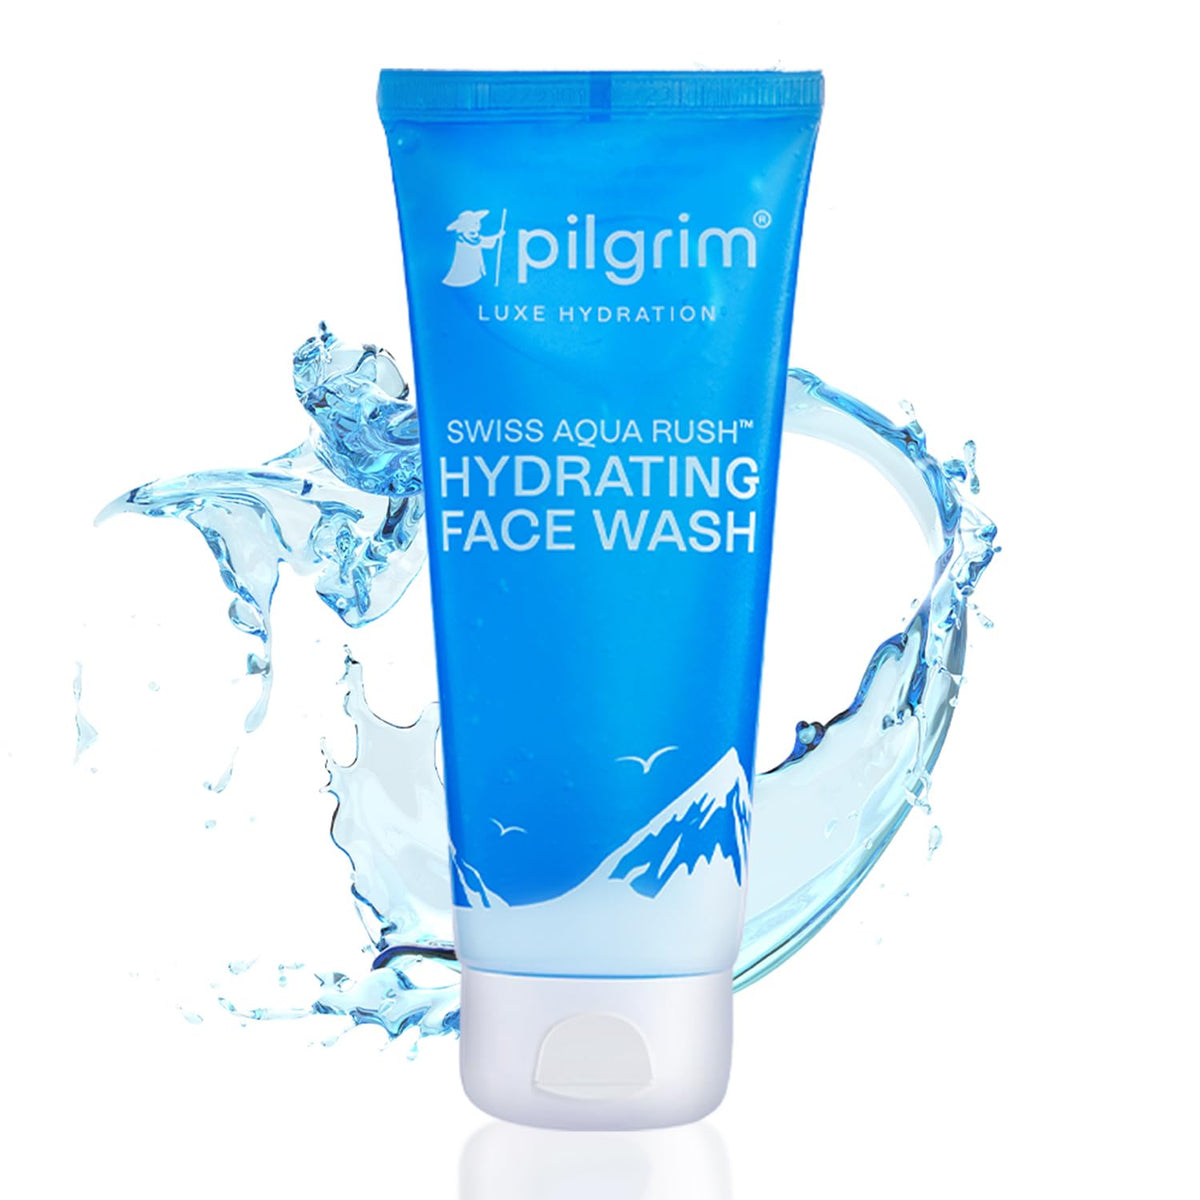 Pilgrim SWISS AQUA RUSH? HYDRATING FACE WASH for men & women | Crafted with powerful hydrators - Pentavitin, Aquaxyl, Swiss Aqua Rush | Hydrating Face wash | Refreshes skin & restores hydration|100 ml